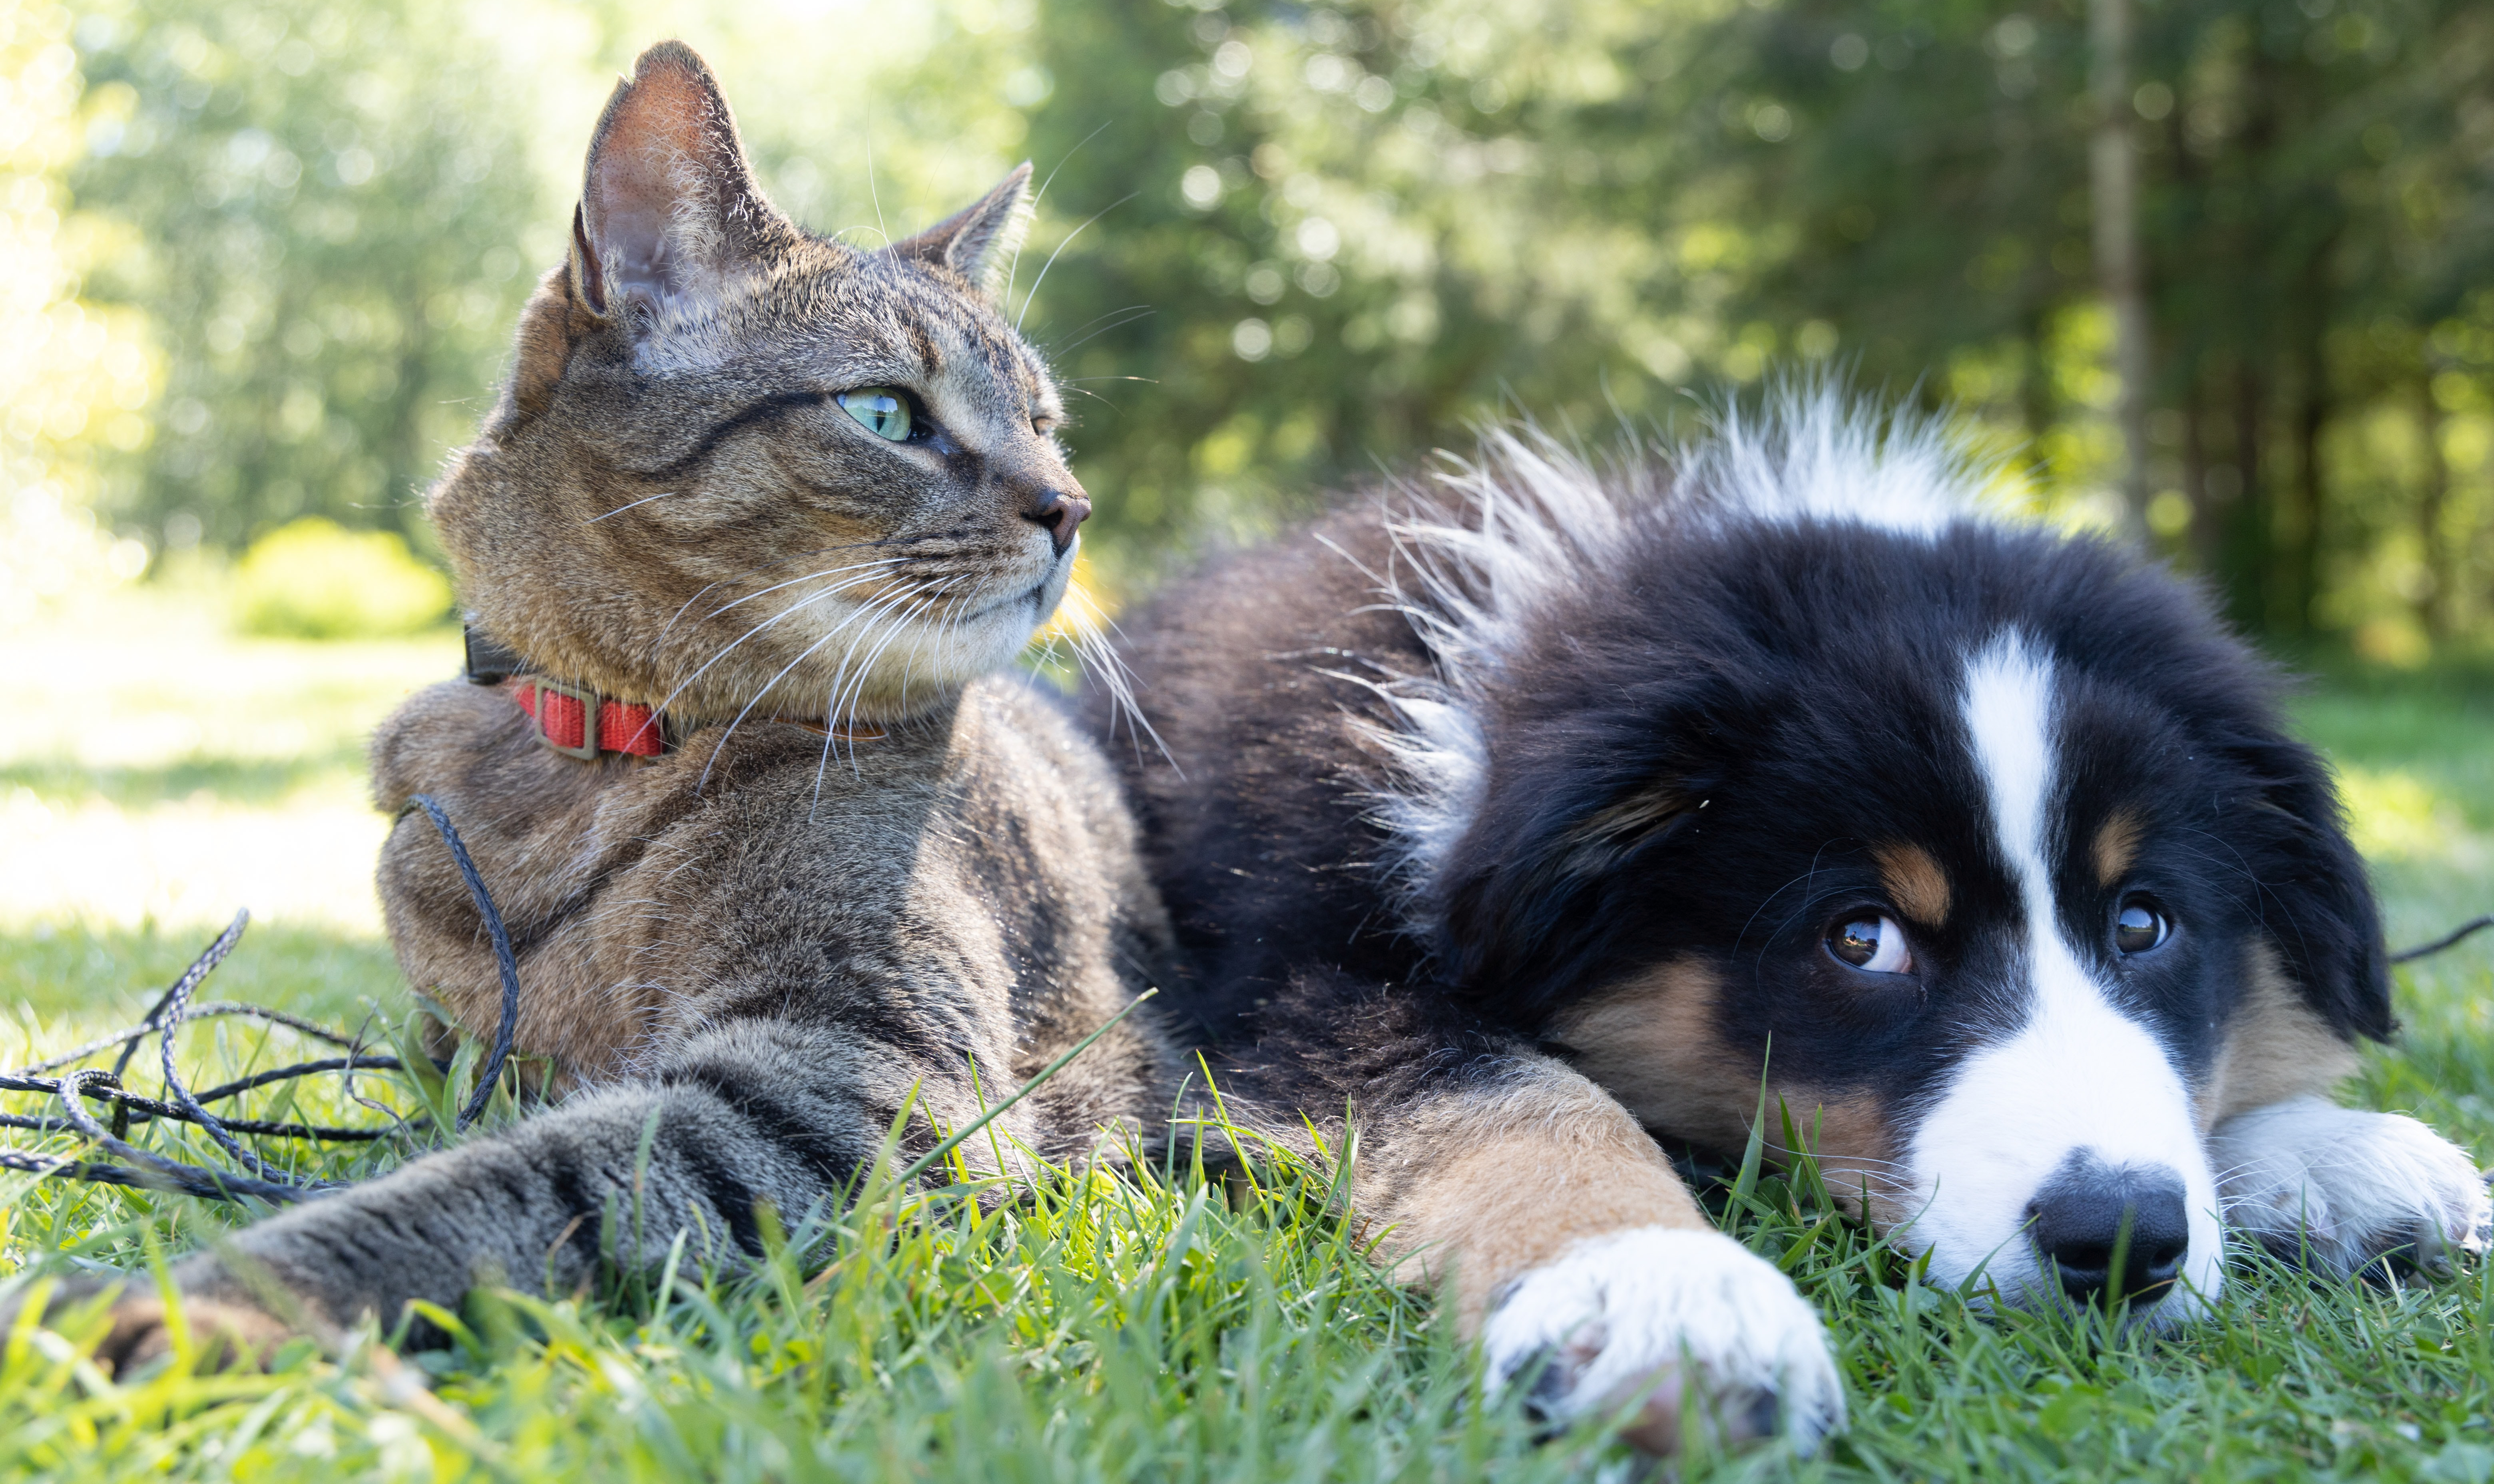  pet cat and dog rest on the grass